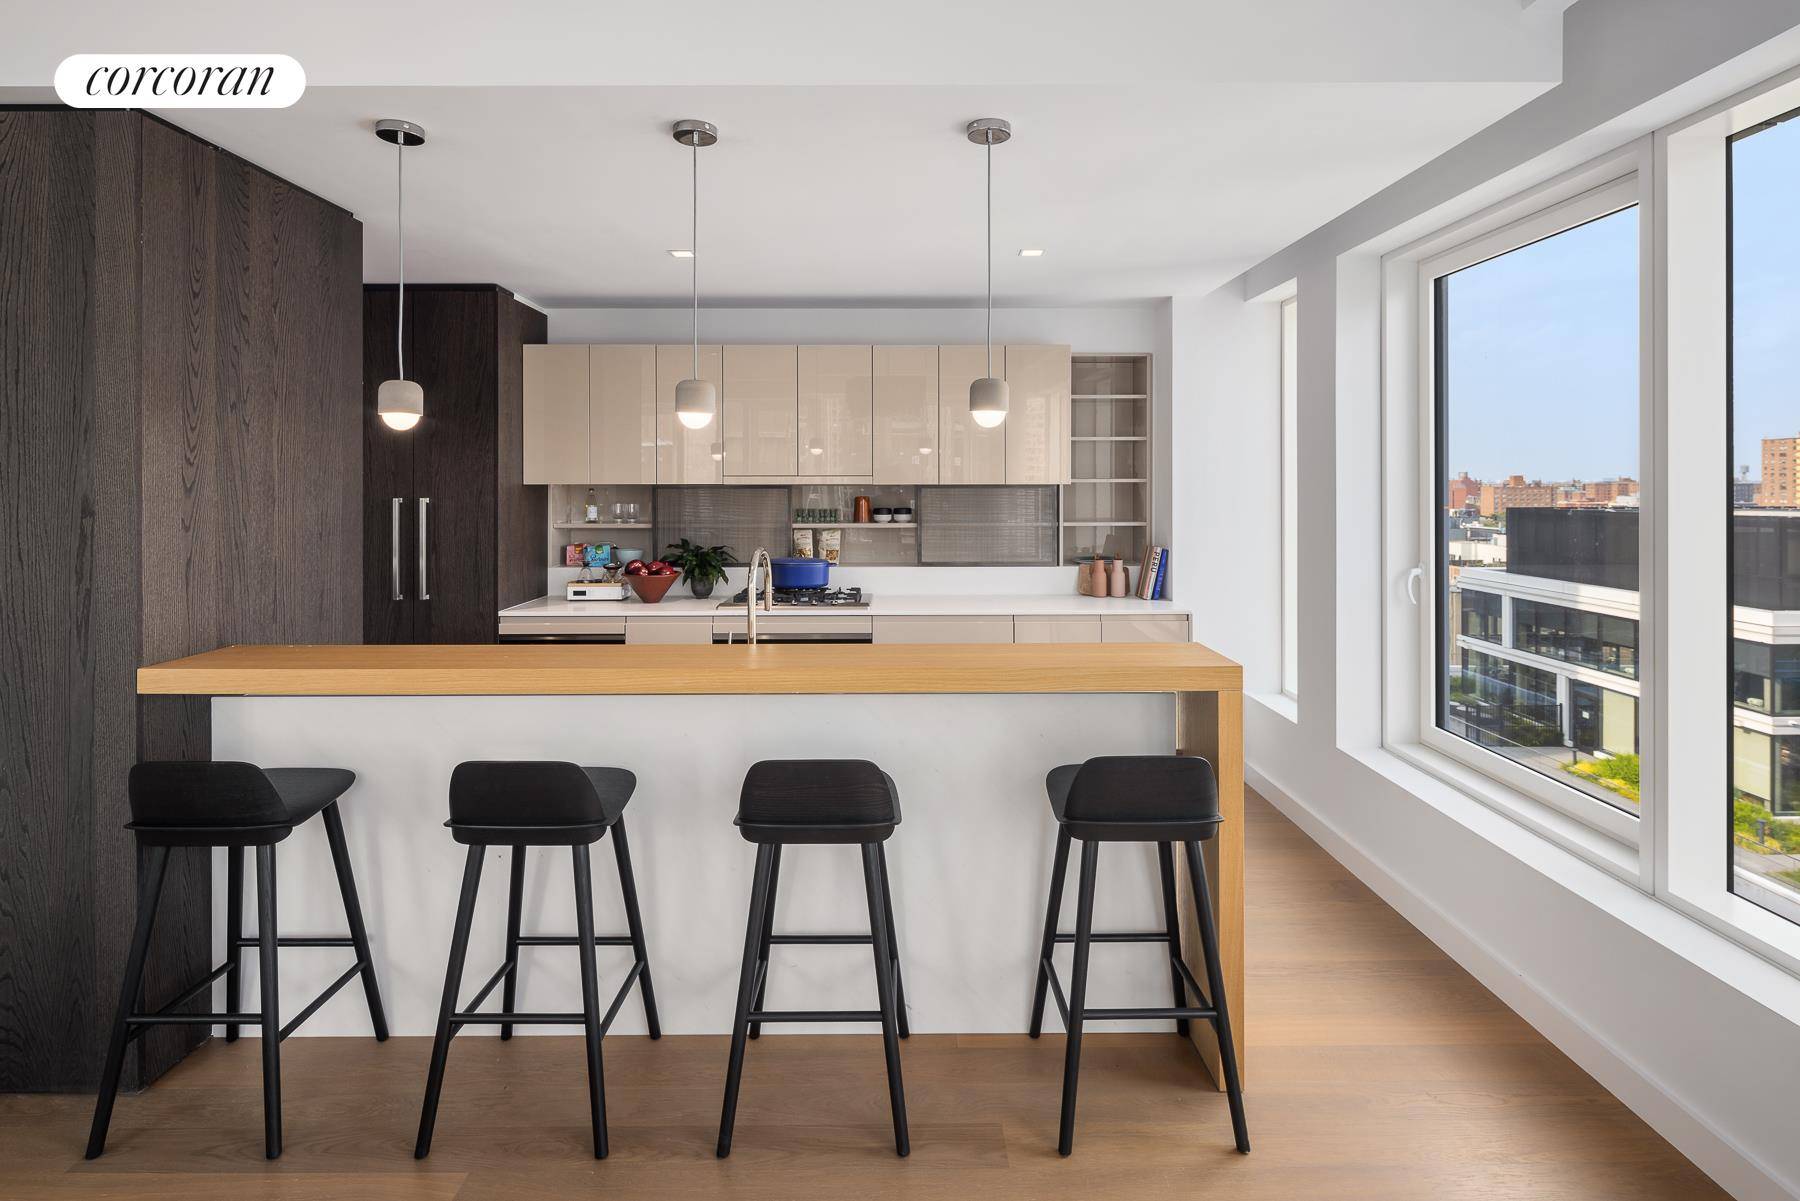 PRICE IMPROVEMENT FINAL OPPORTUNITIES ASK US ABOUT OUR PURCHASER INCENTIVES Sitting at the heart of this authentic and historic New York neighborhood One Essex Crossing is the premier residential offering ...